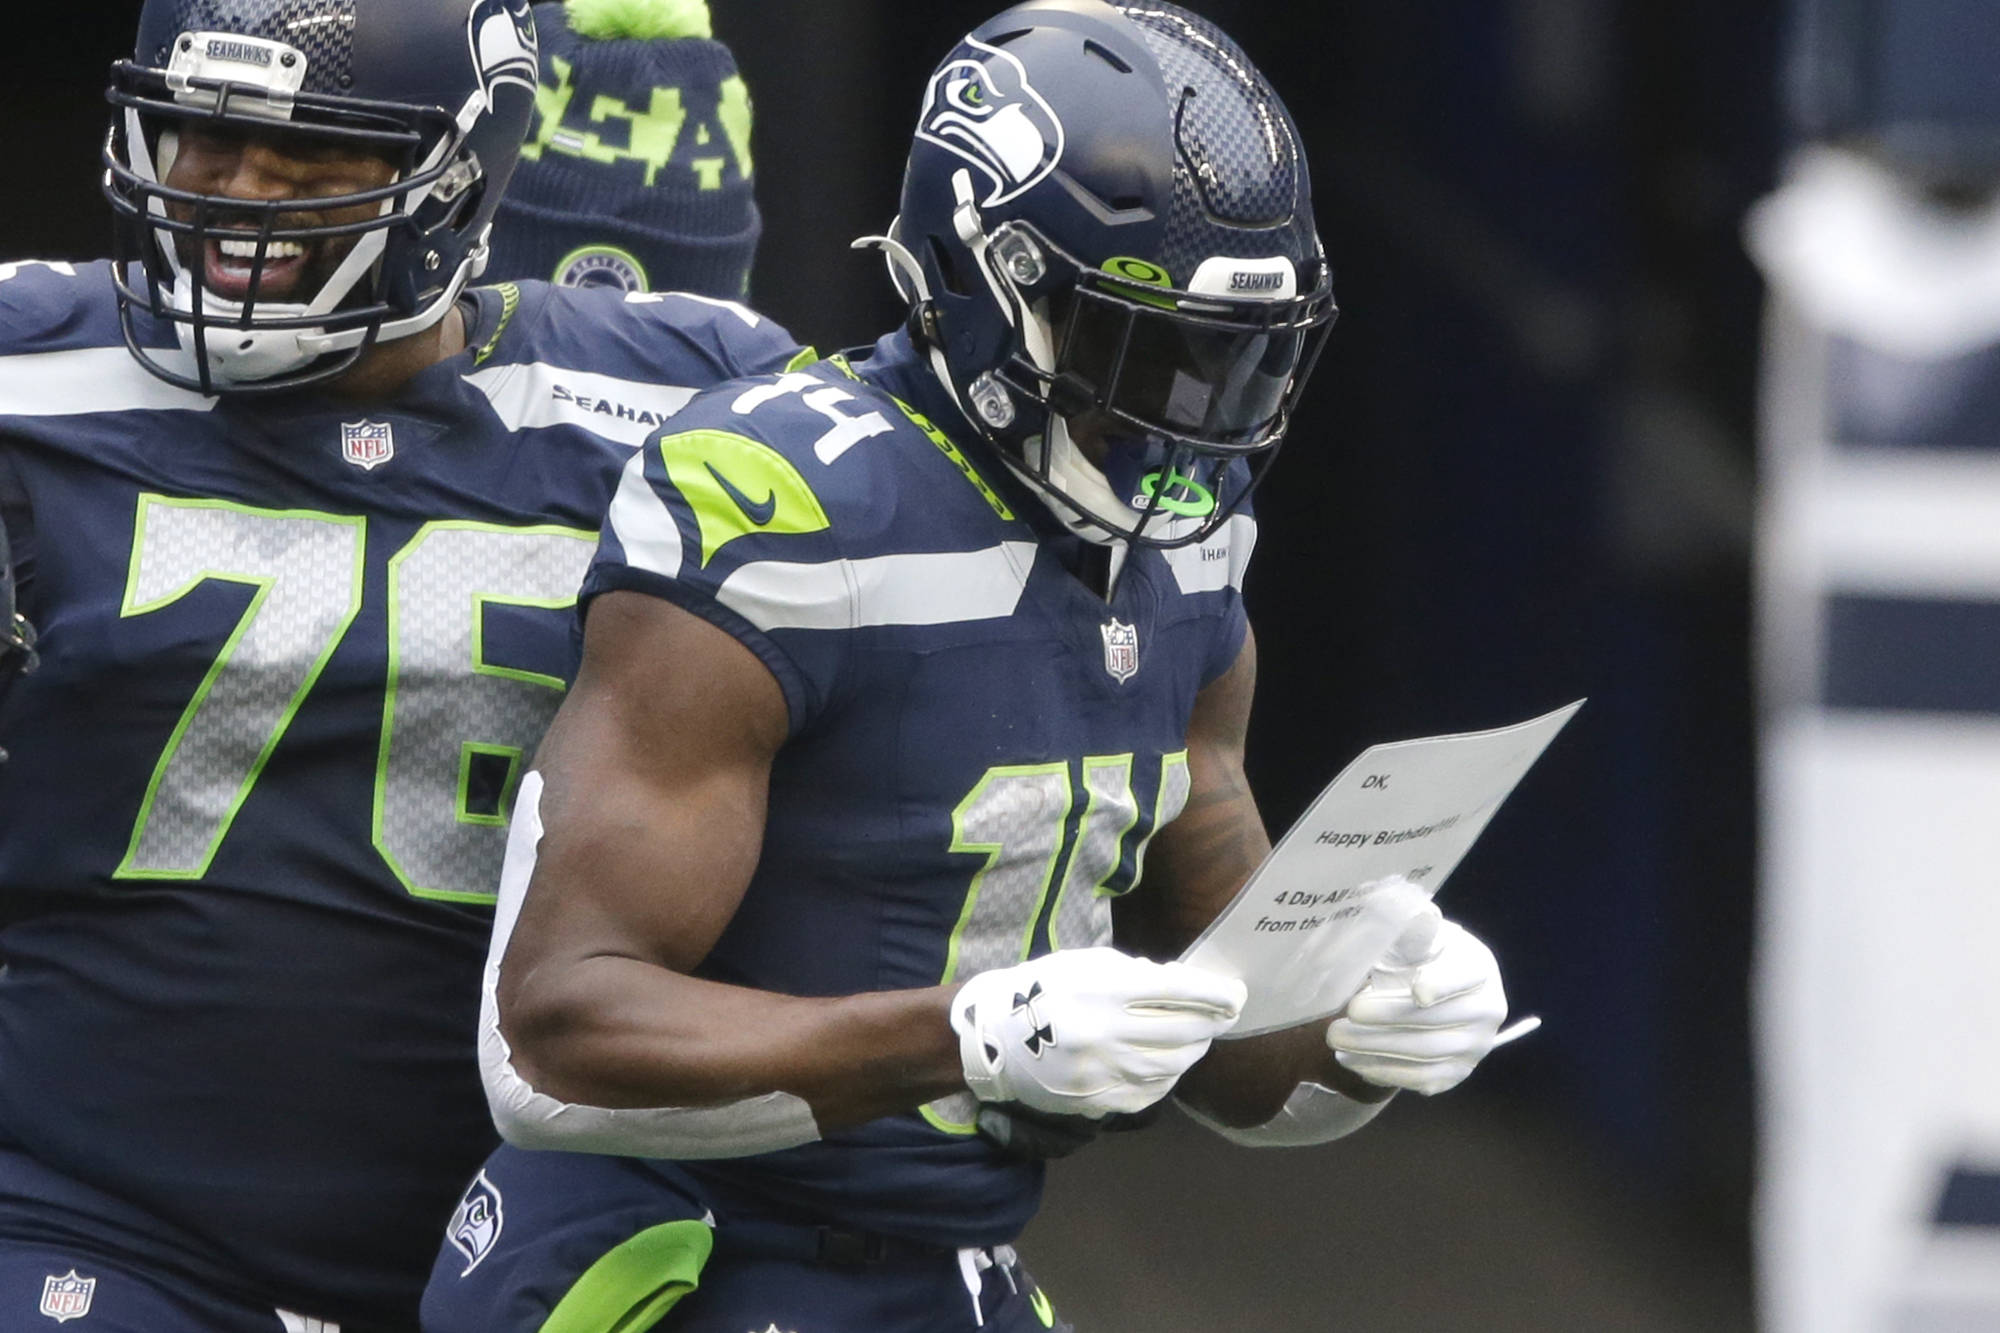 Seattle Seahawks wide receiver DK Metcalf reads a birthday note handed him by his teammates after he scored a touchdown against the New York Jets during the first half Sunday at Lumen Field. (AP Photo/Lindsey Wasson)